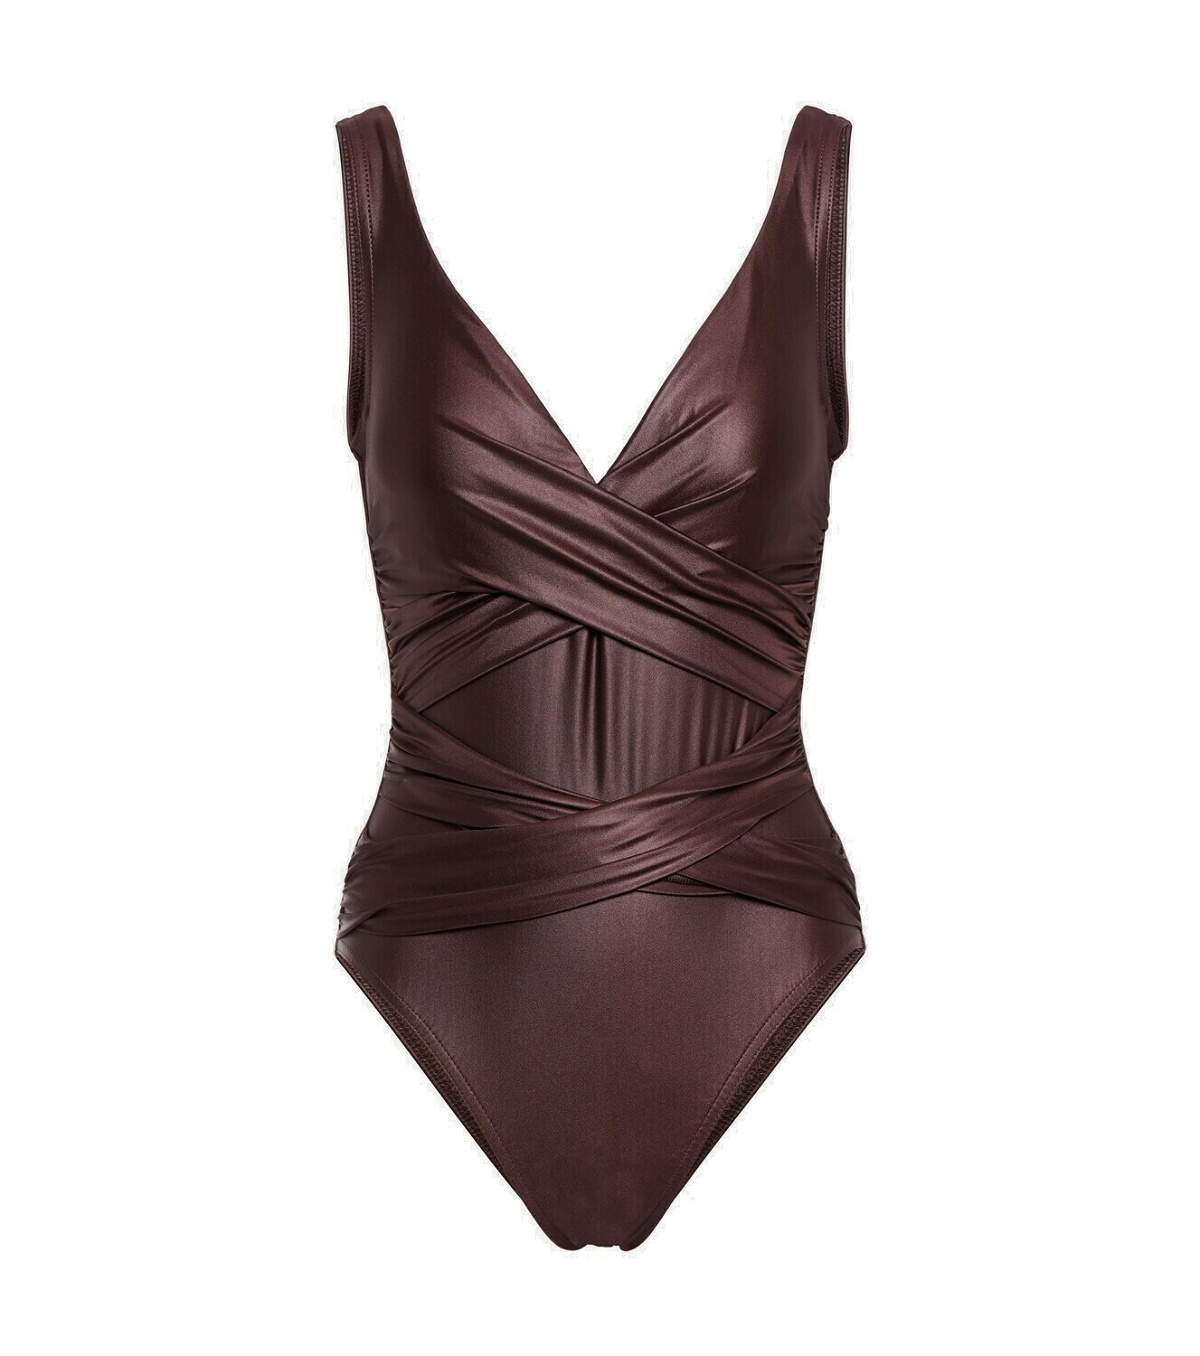 Karla Colletto Basics ruched swimsuit Karla Colletto